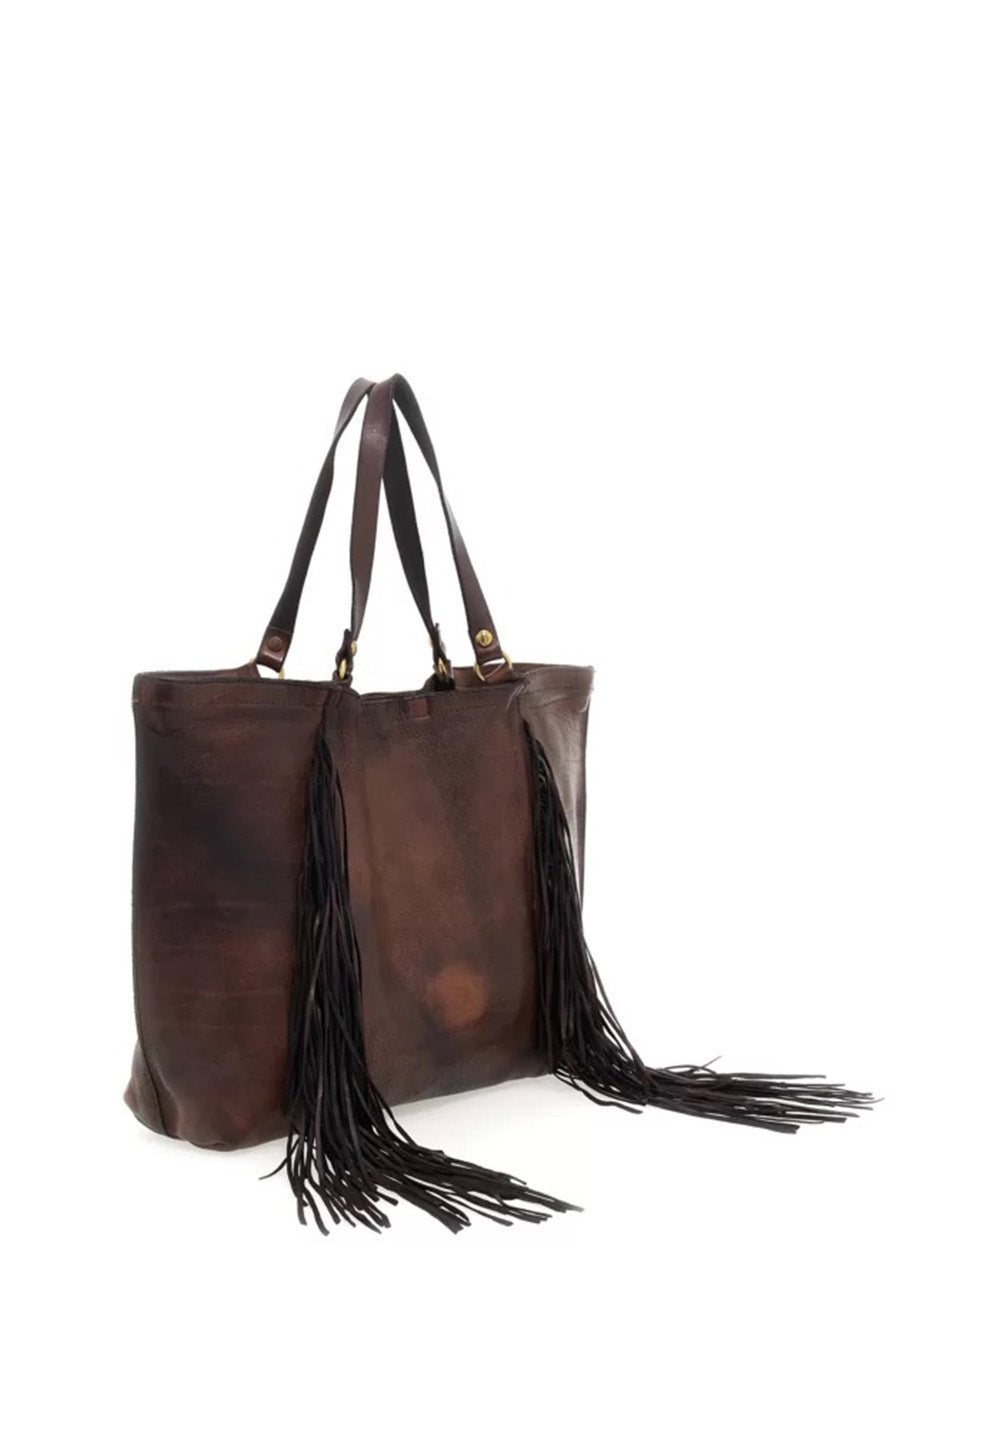 Leather Shopping Bag w Fringes - Brown sold by Angel Divine